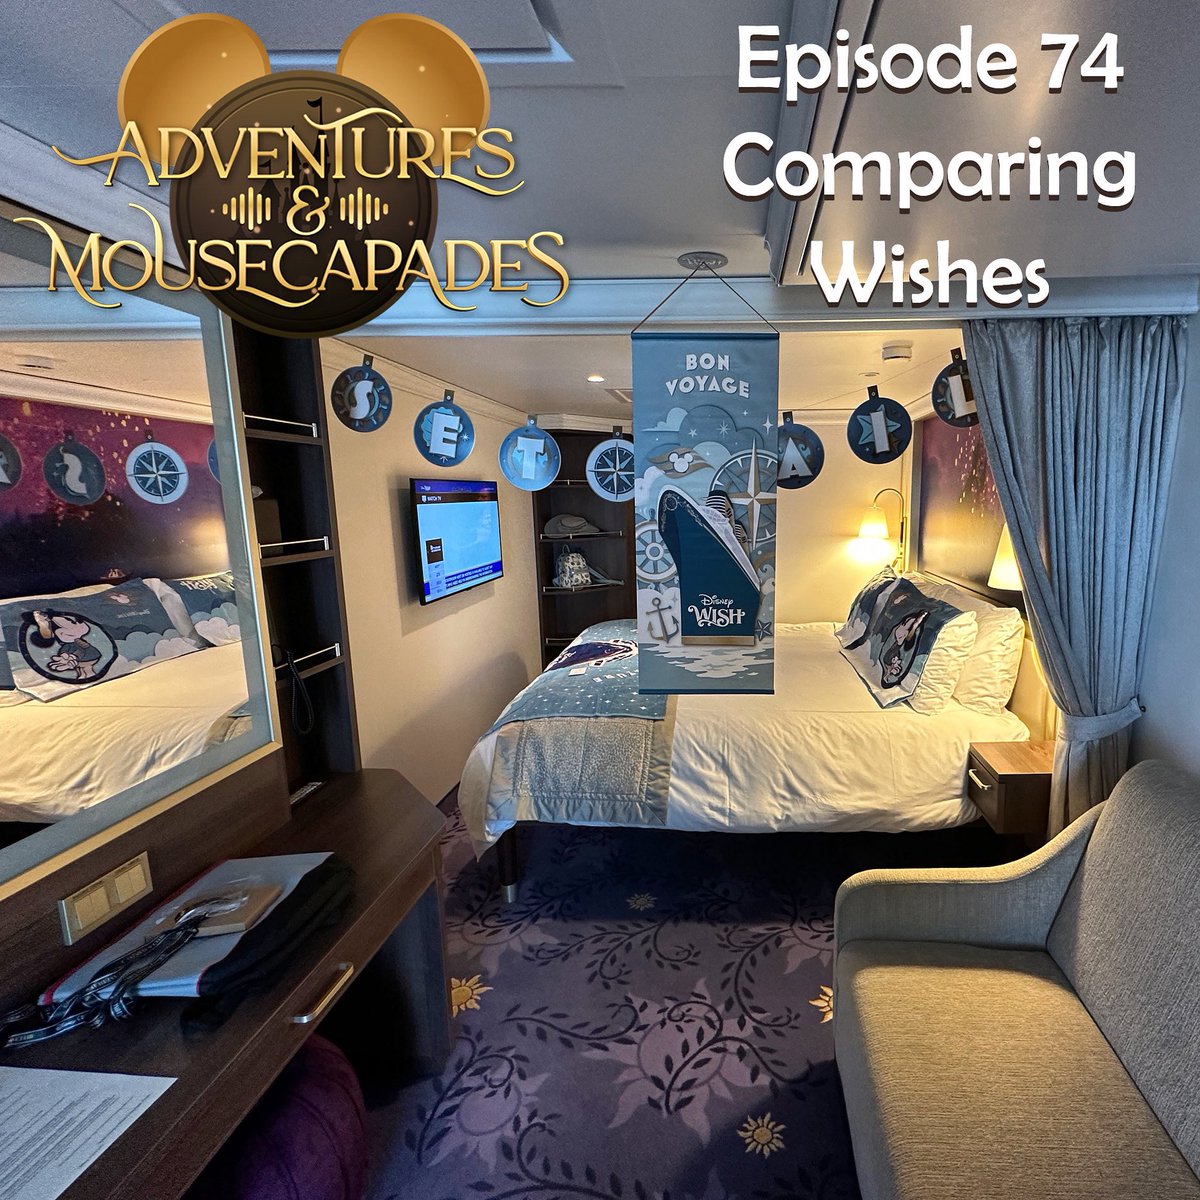 This week Kristin and Ryan join us to compare notes on the #DisneyWish. There’s some great stuff (kids clubs) and some areas for improvement (Cove access). Plus hear about rough seas onboard. Ready your sea legs! Link in bio.
#DCL #disneycruise #disneytravel #disneypodcast